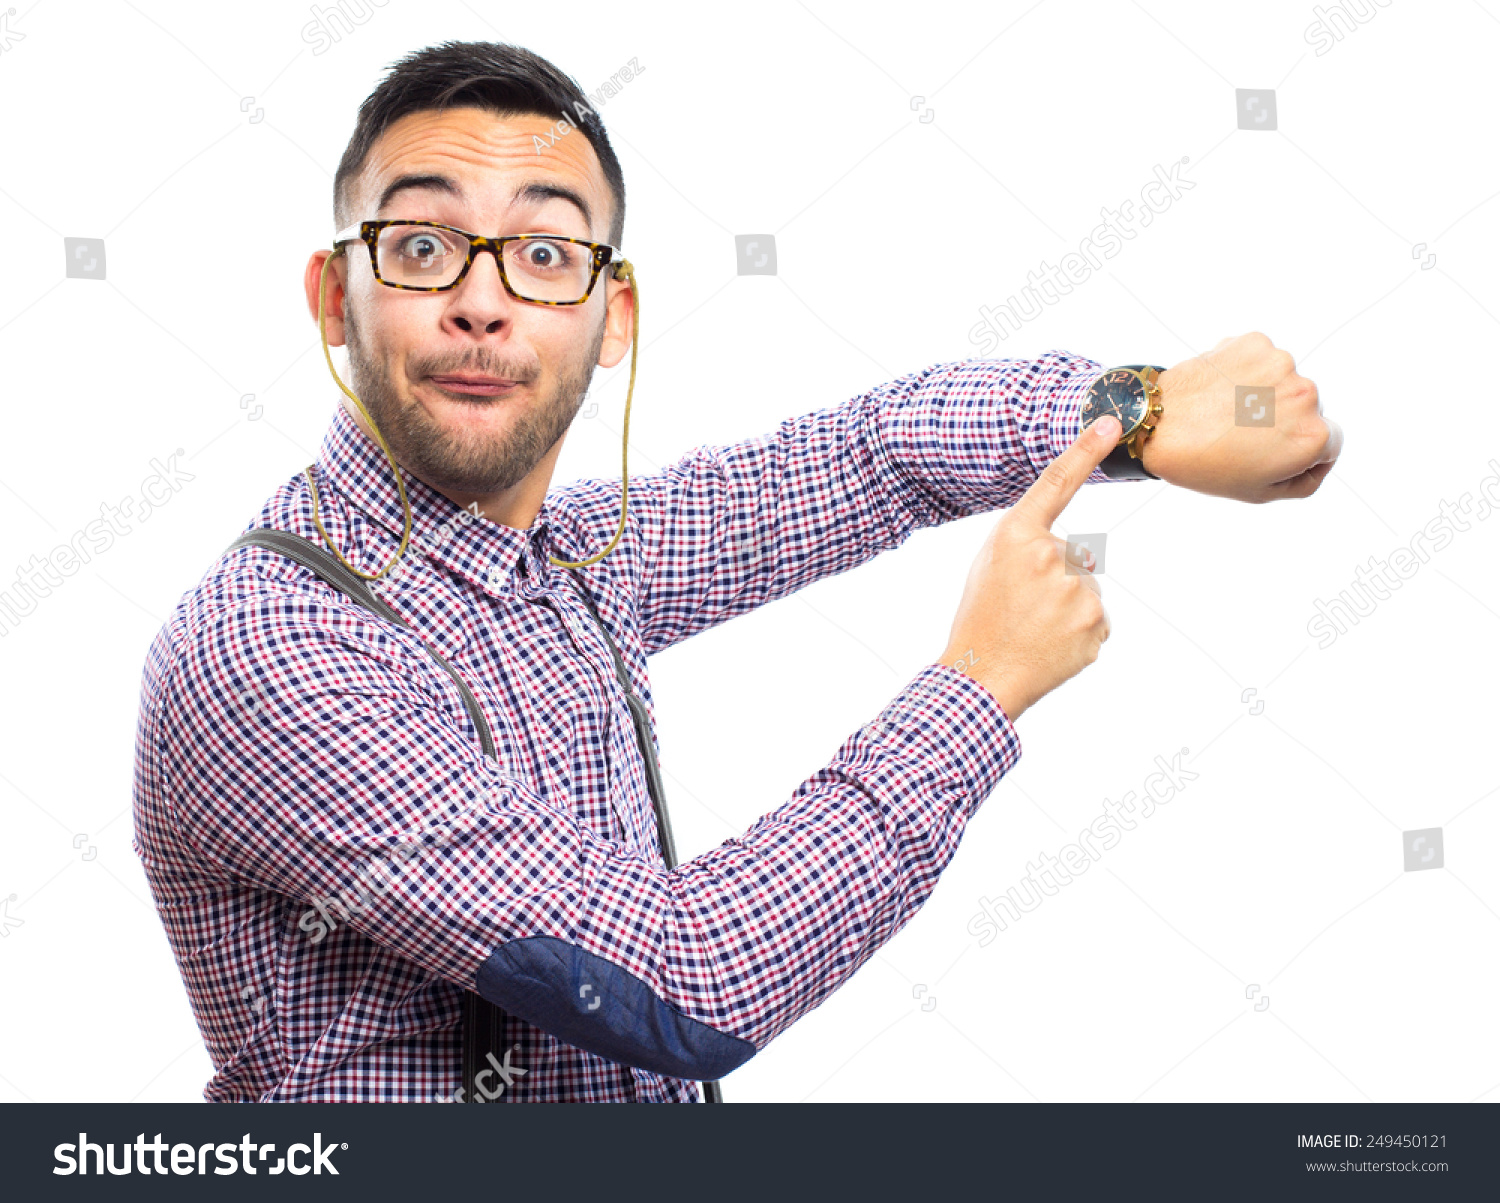 stock-photo-funny-nerd-pointing-his-watch-249450121.jpg